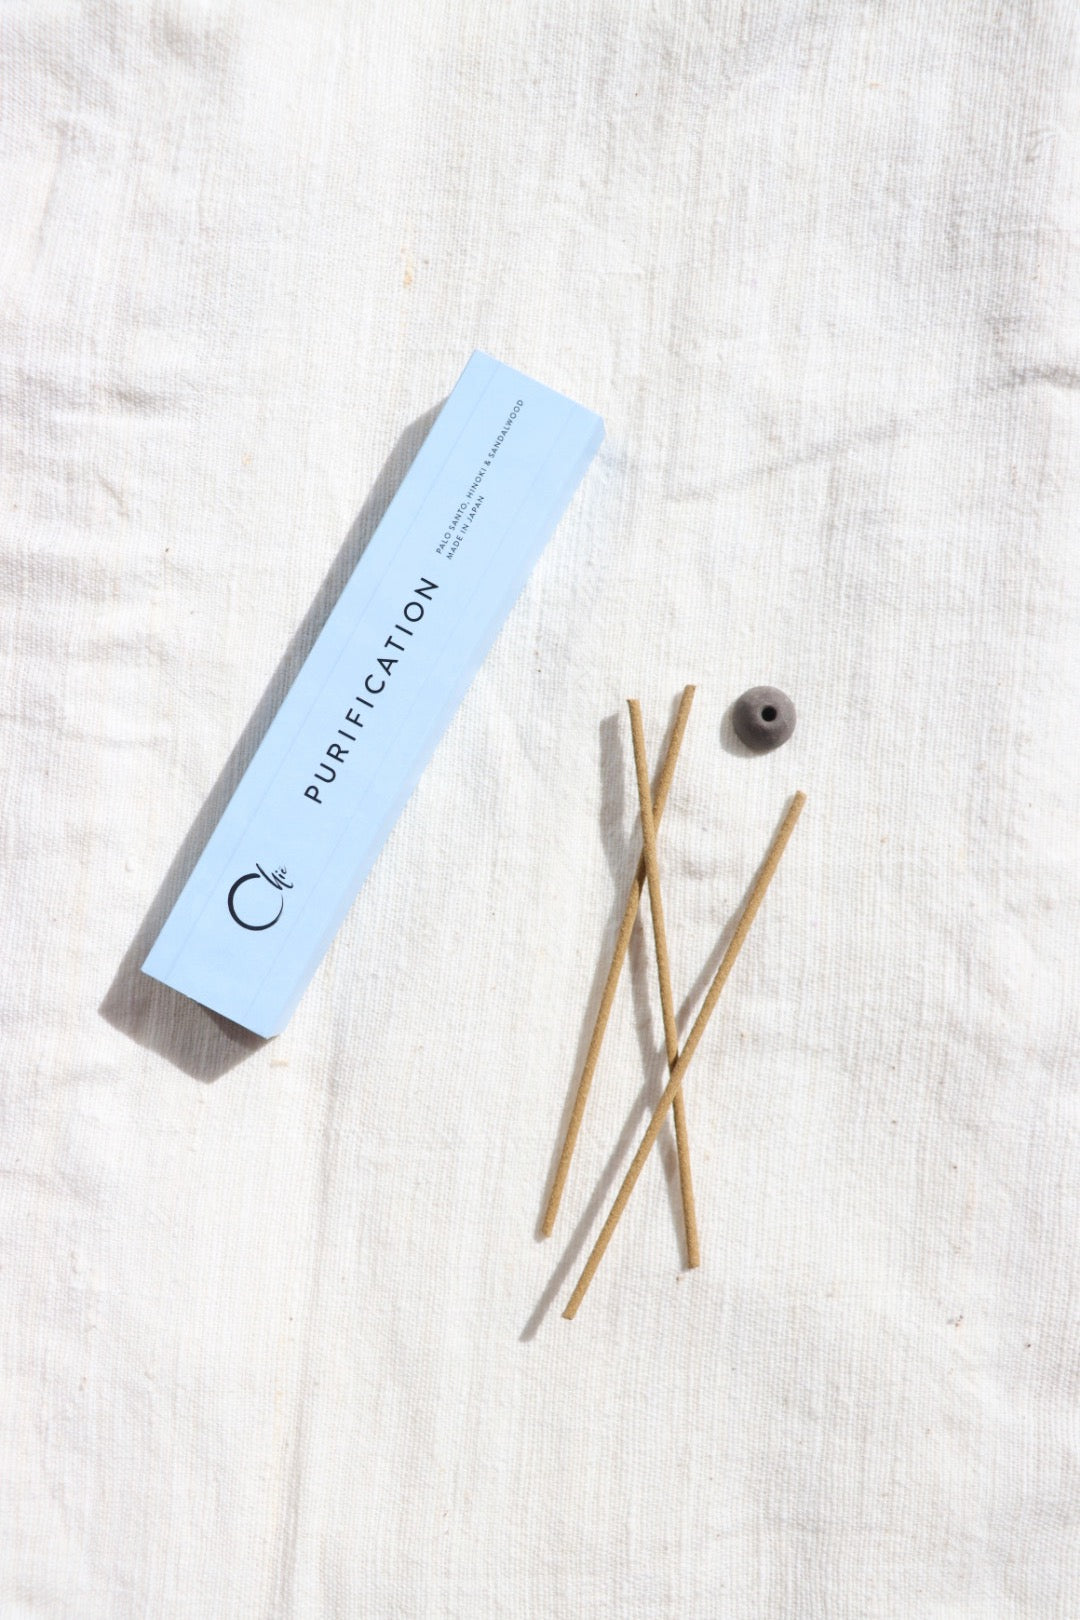 Chie Purification Incense